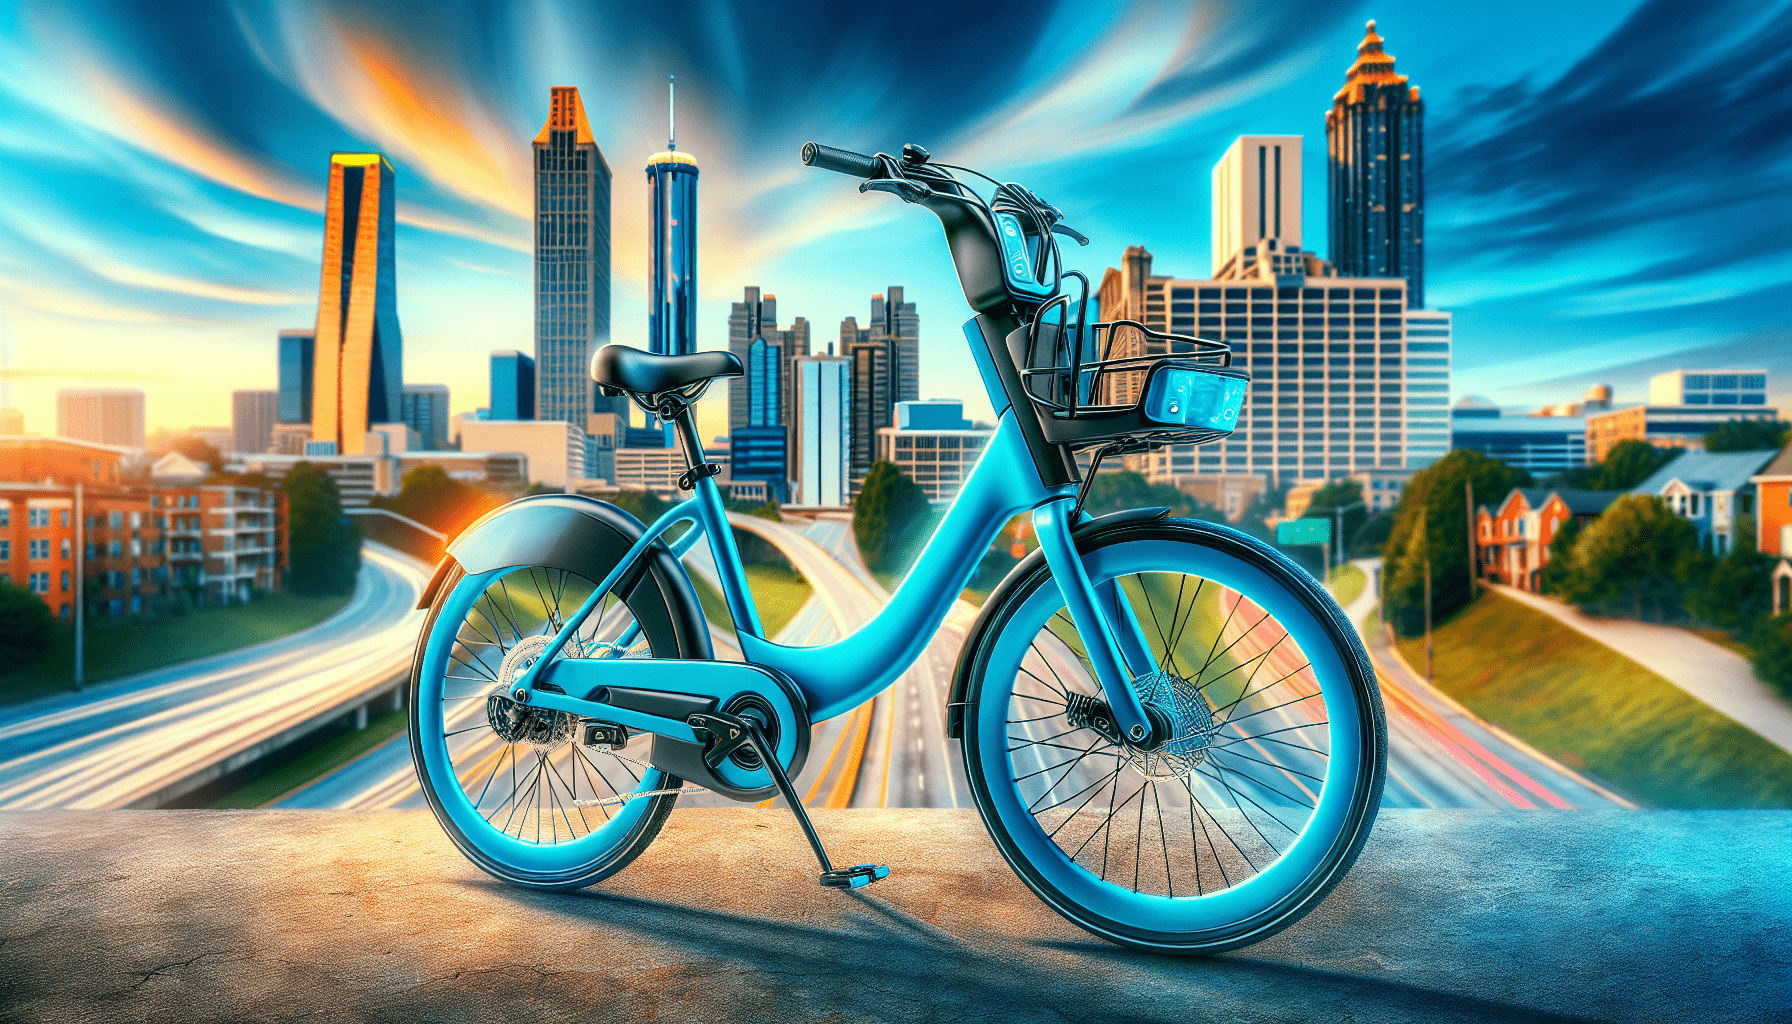 How Much Does It Cost To Rent A Bike In Atlanta?